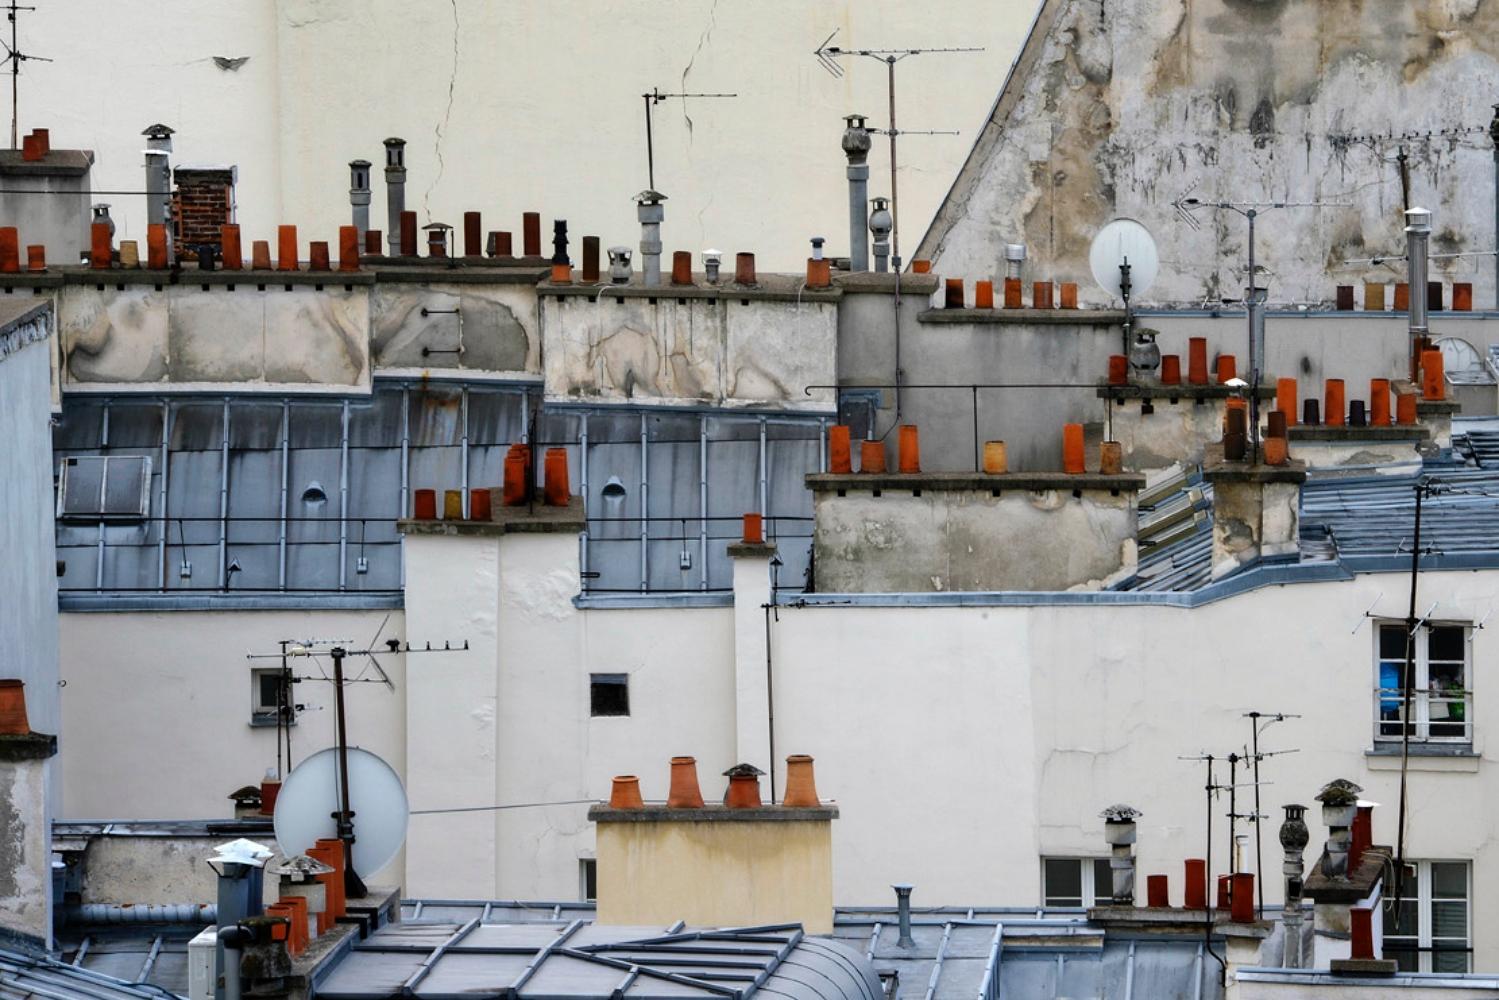 Michael WOLF (1954 – 2019, Germany)
Paris Rooftops 14, 2014
C–print
Sheet 121,9 x 172,7 cm (48 x 68 in.) 
Edition of 9, plus 2 AP; Ed. no. 2/9

Michael Wolf was born in 1954 in Munich, Germany. He worked and lived in Paris and Hong Kong where he